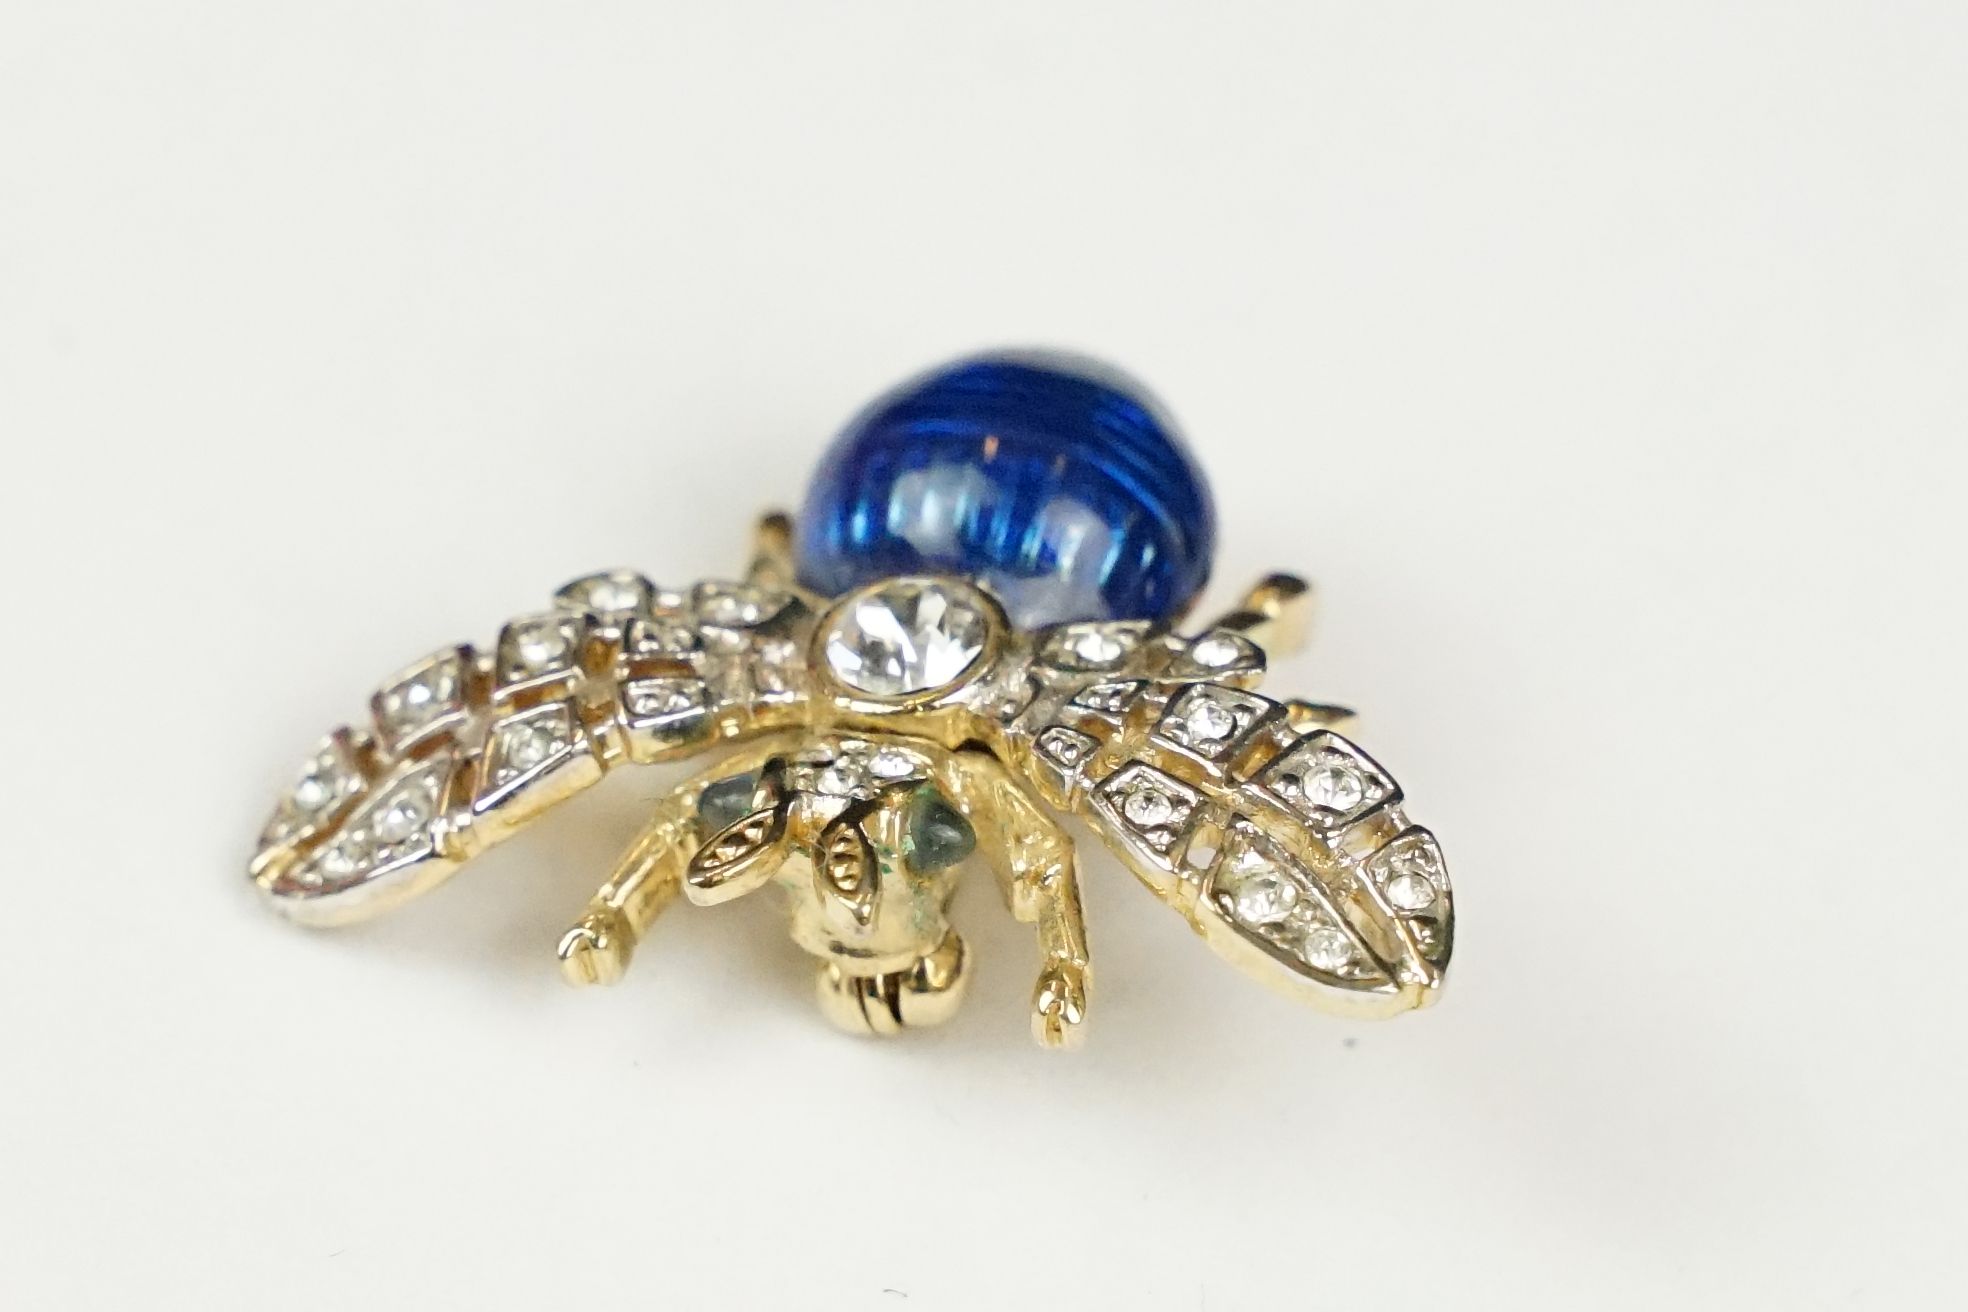 Gilt bee brooch with diamonte and glass body and eyes - Image 2 of 3